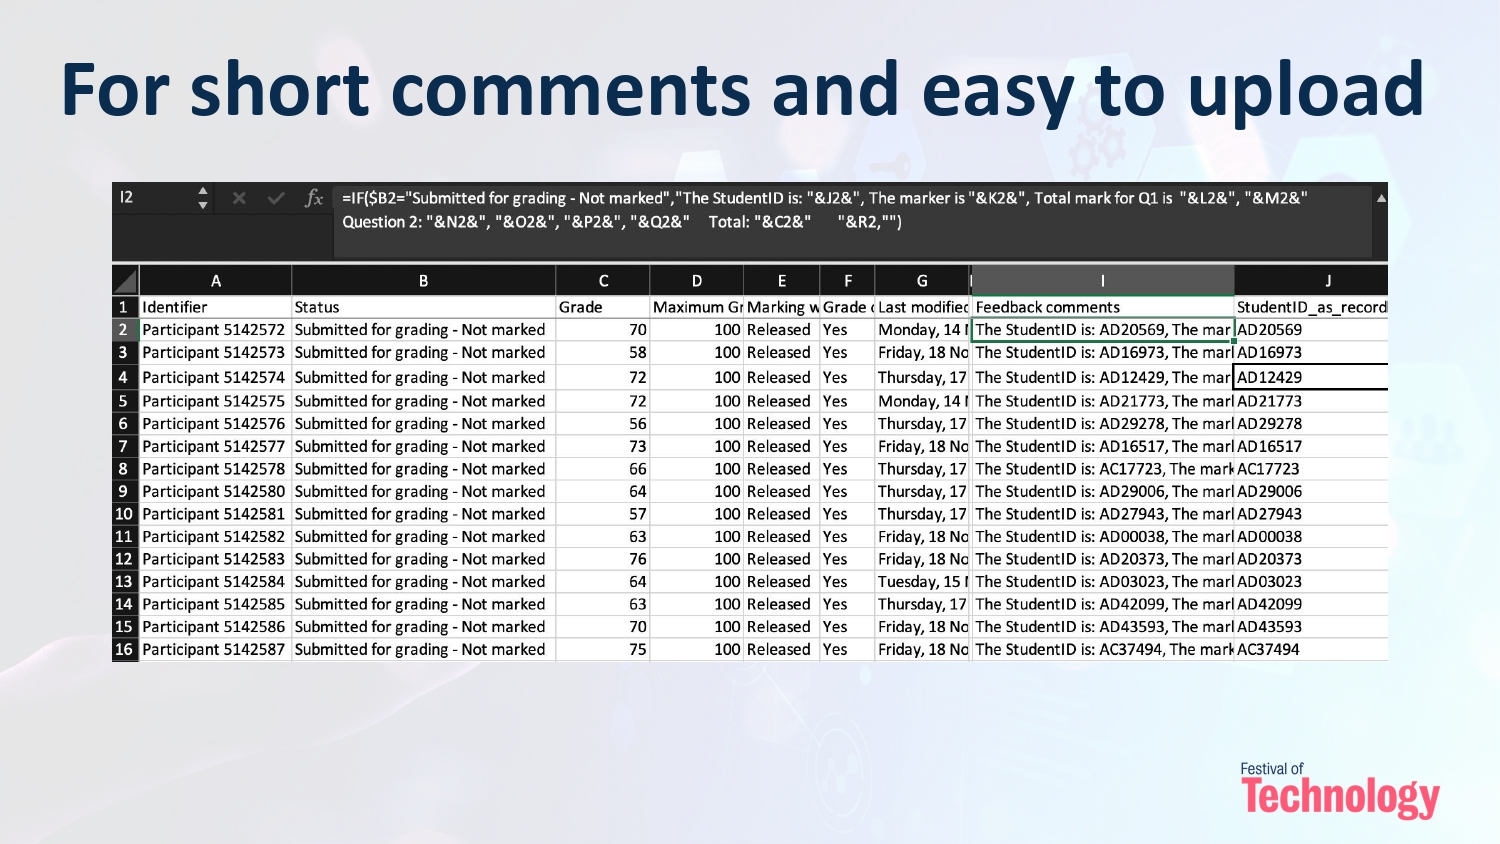 Screenshot of excel file showing comments